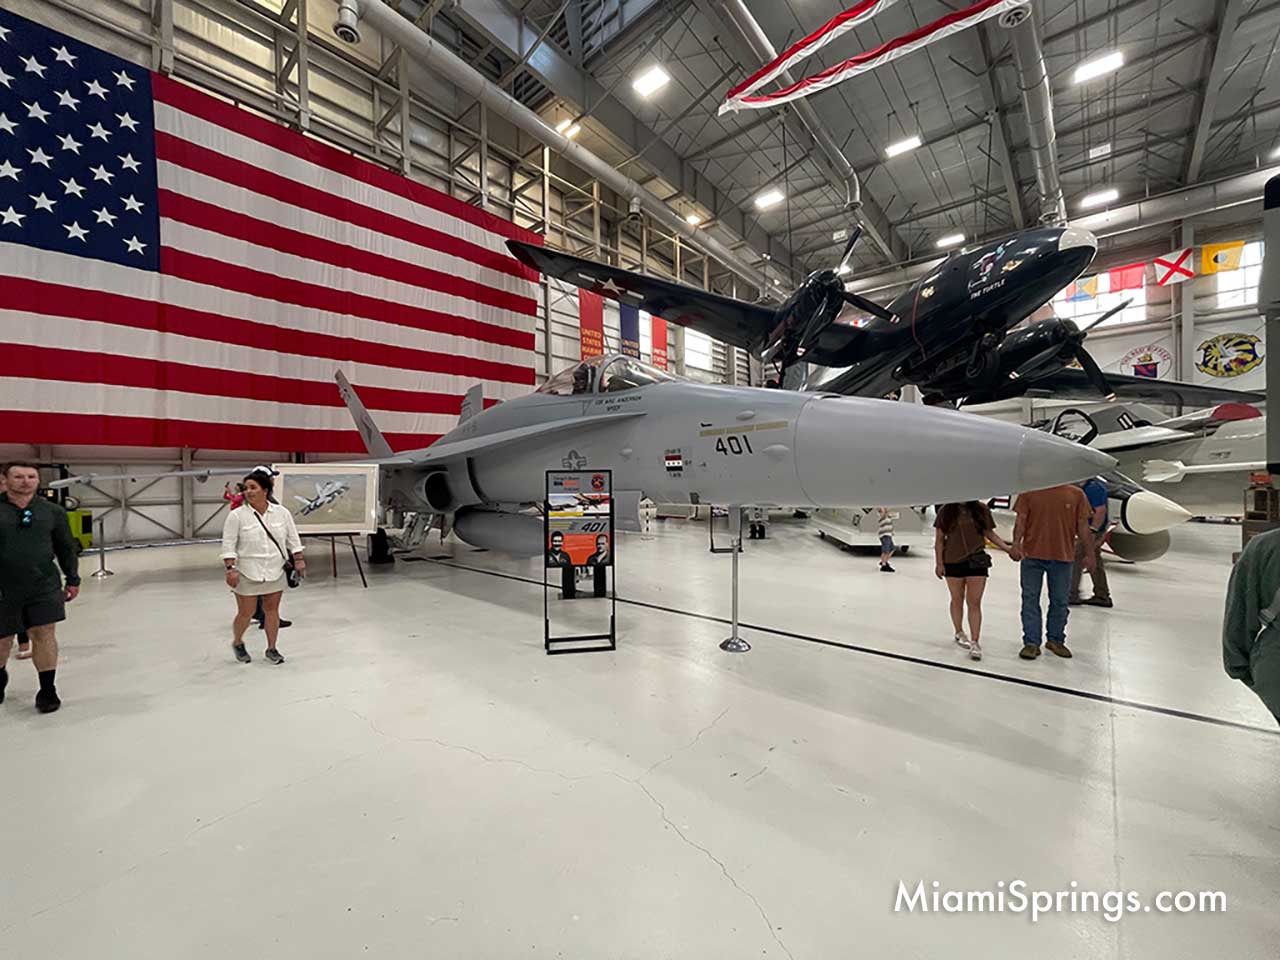 F-18 Hornet at the National Naval Aviation Museum in Pensacola, Florida